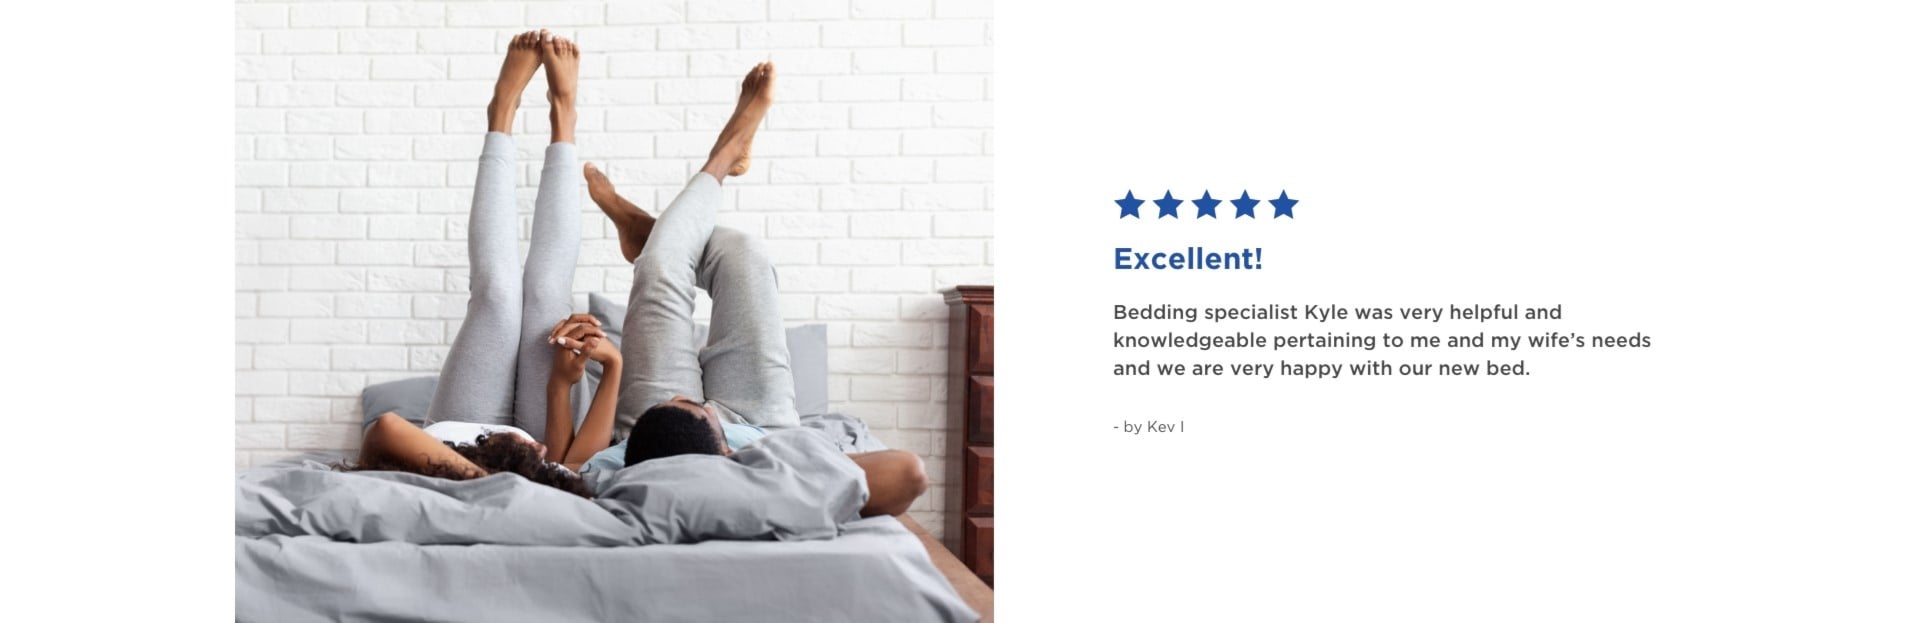 Excellent | 5 Stars | Bedding specialist Kyle was very helpful and knowledgeable pertaining to me and my wife's needs and we are very happy with our new bed. - by Kev I